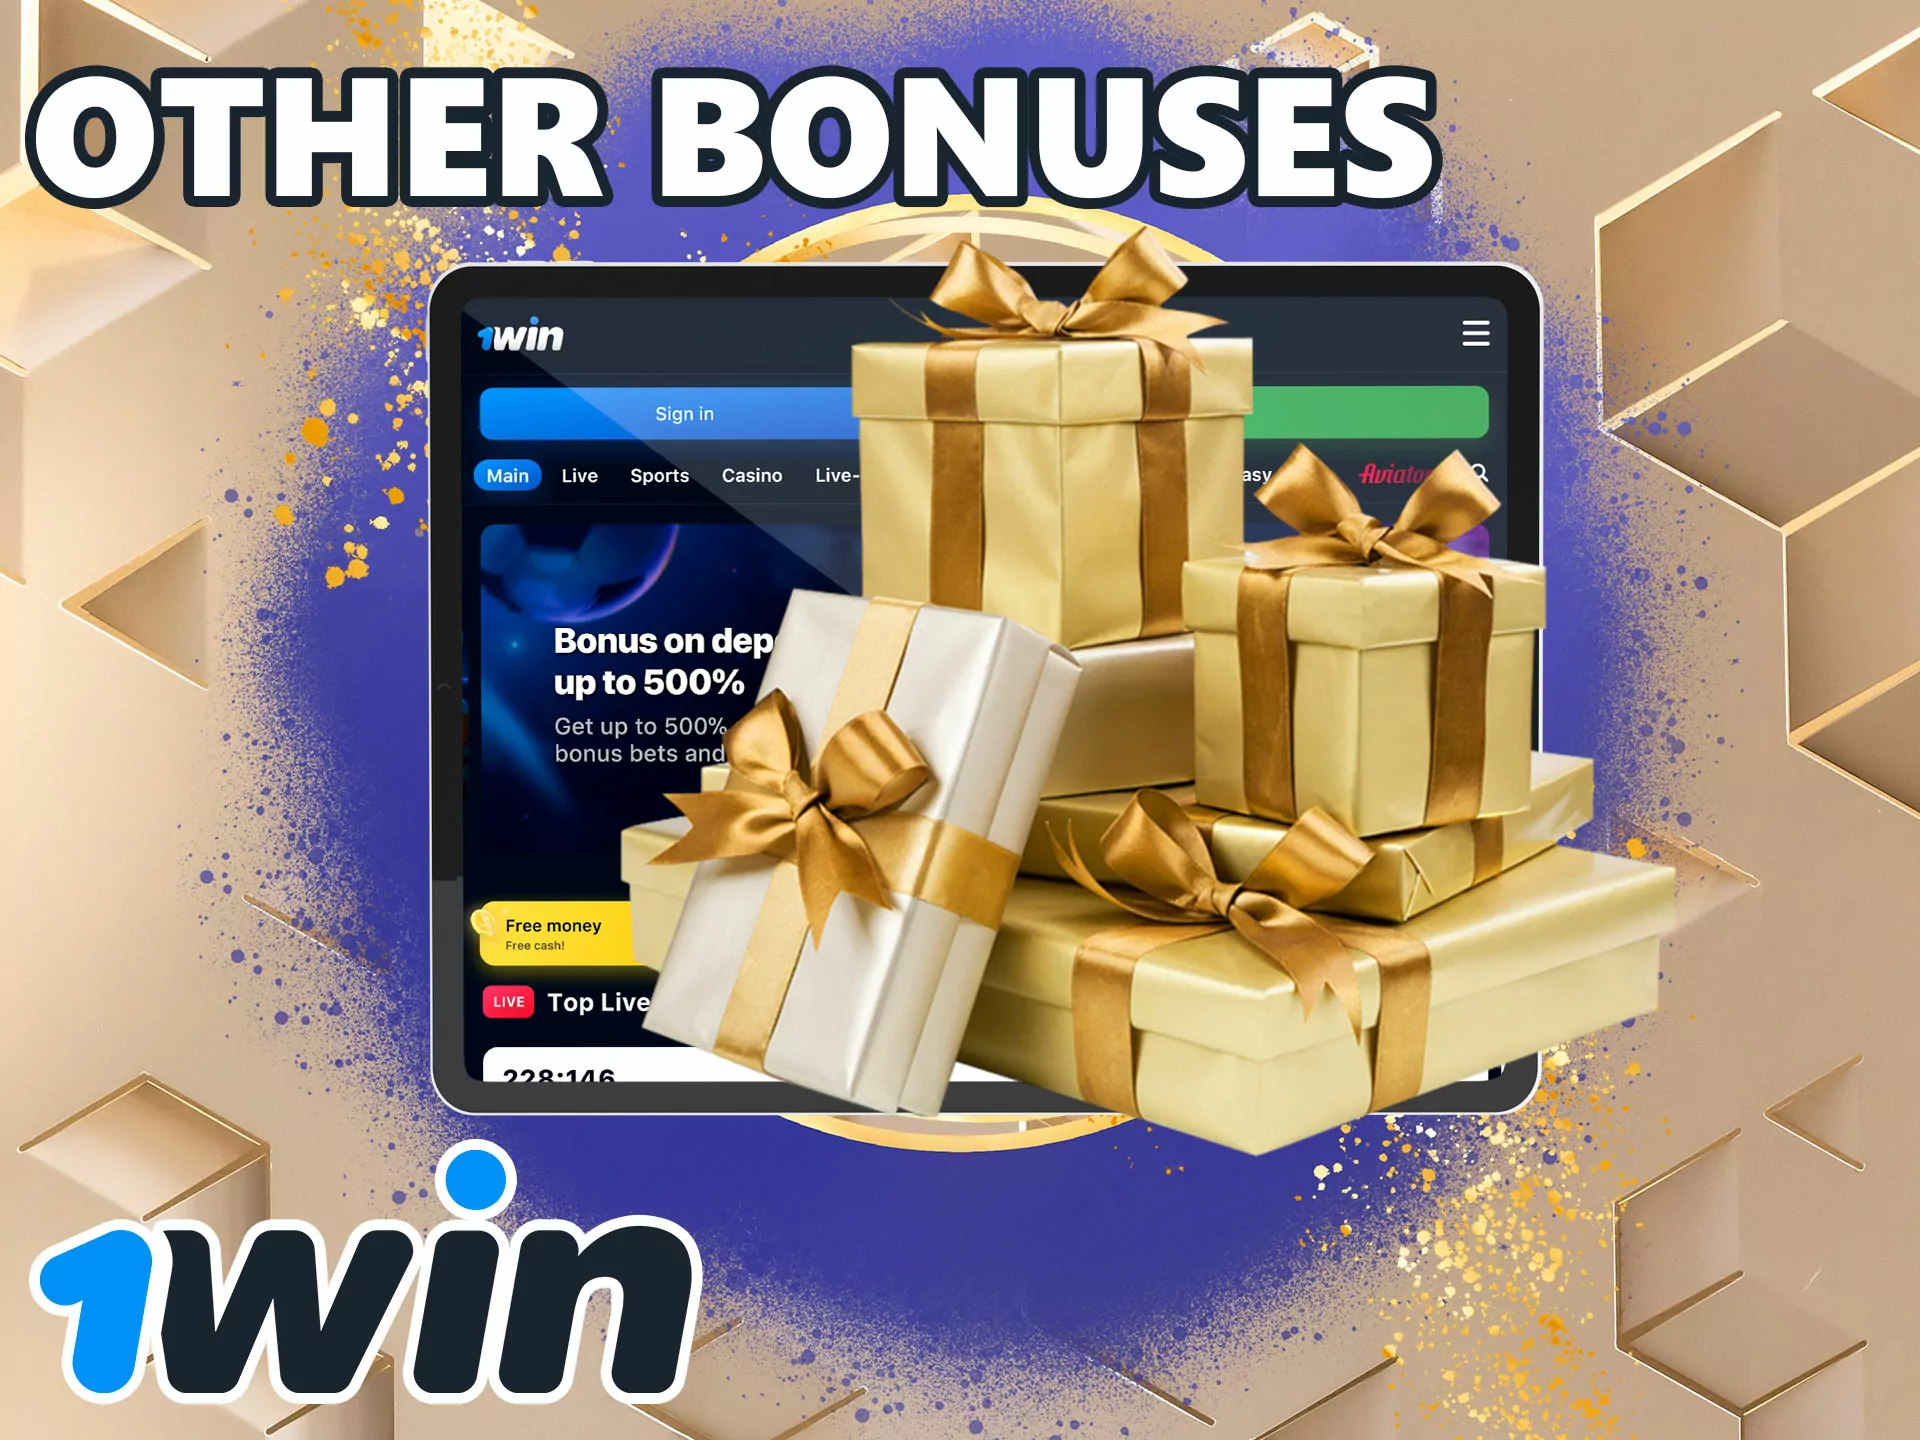 1win has not only a welcome bonus, here you will also find many other nice promotions.